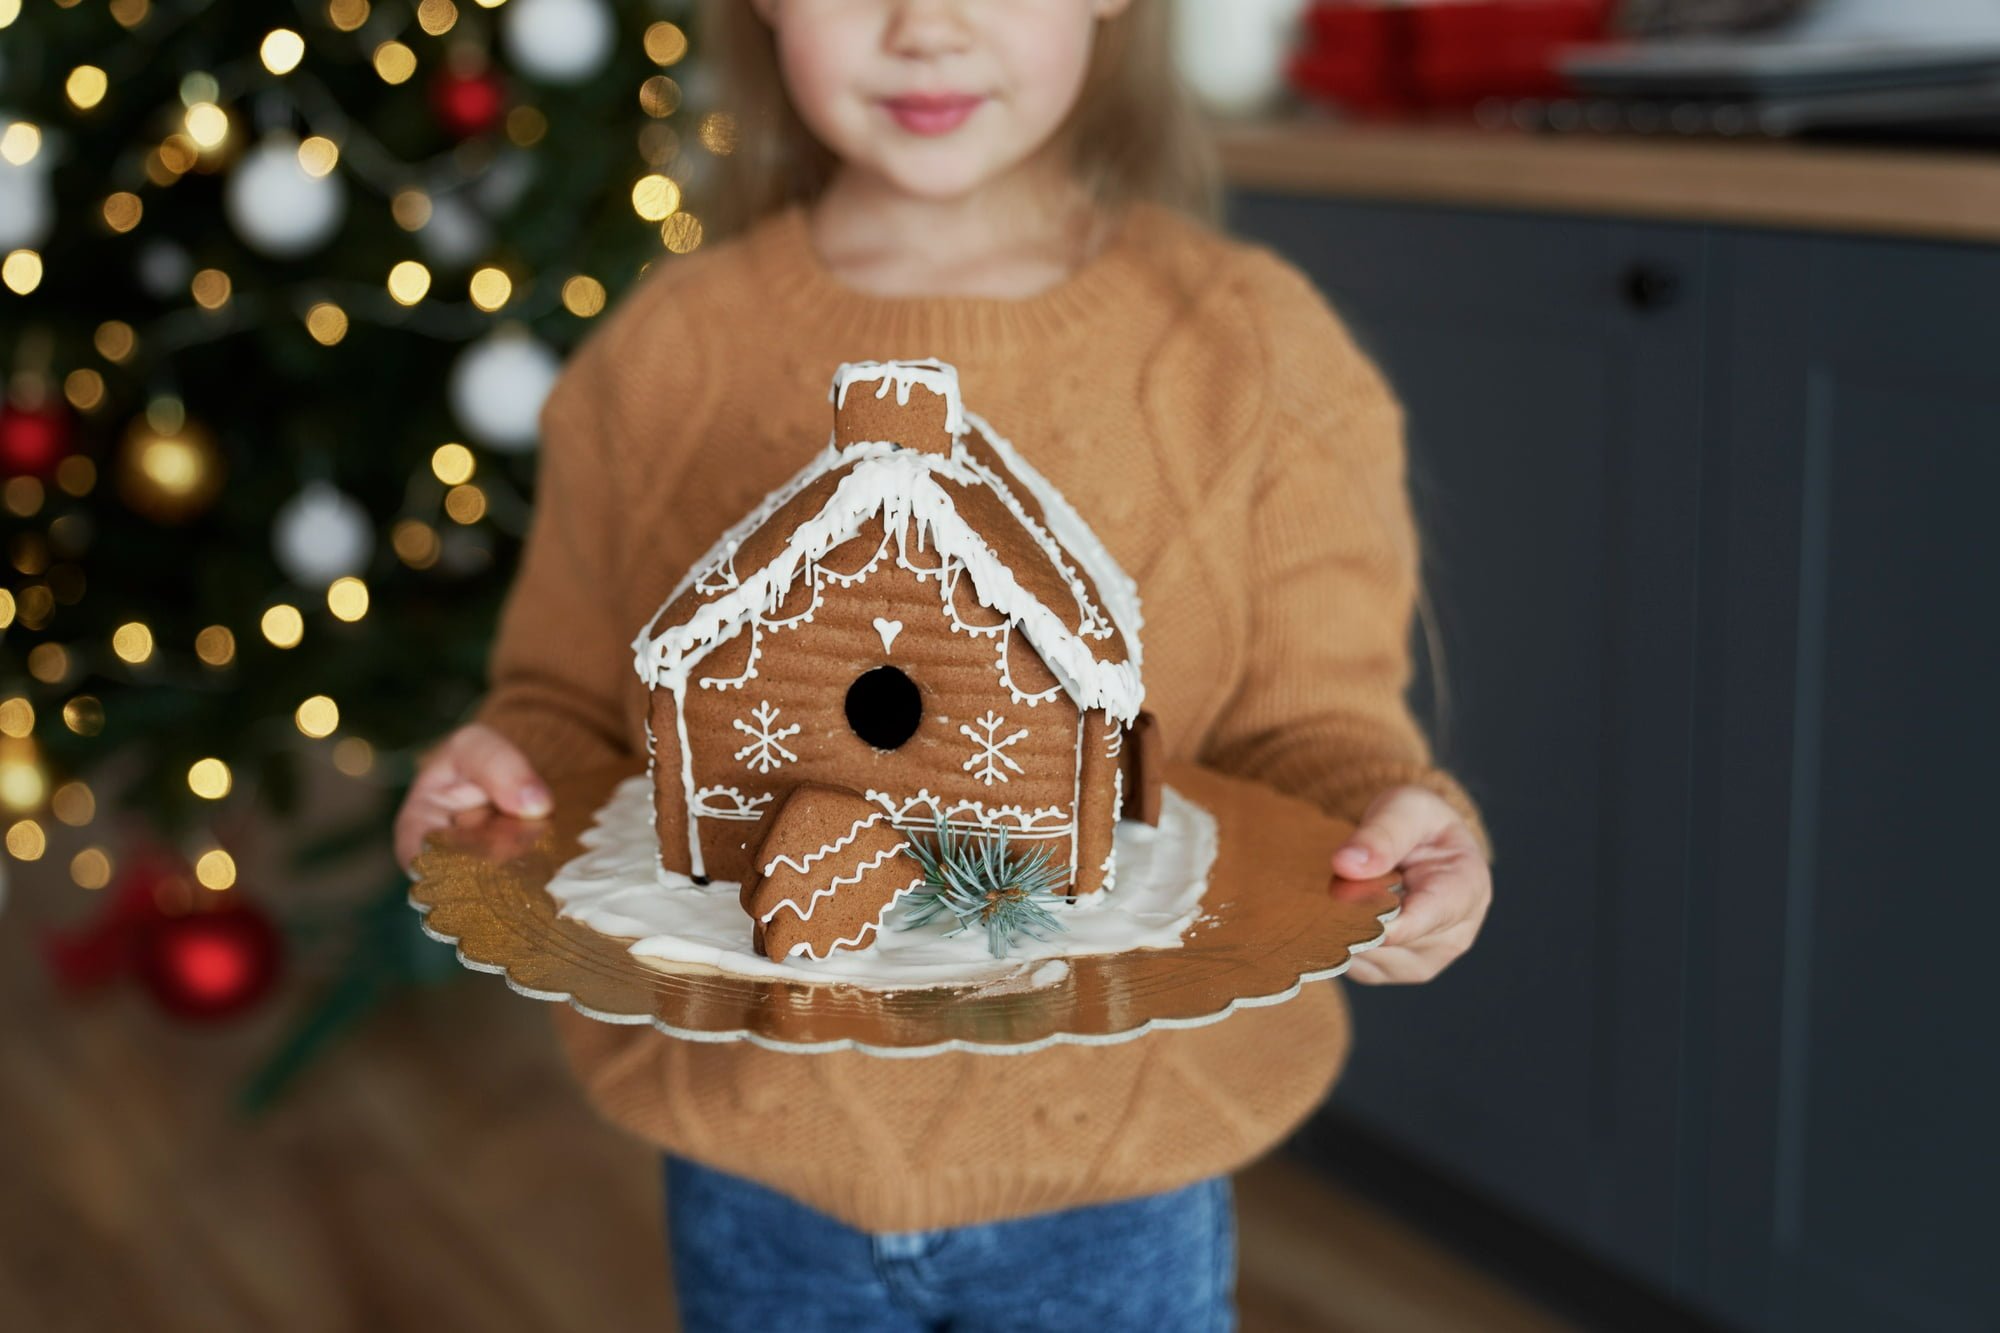 little girl holding her gingerbread house after learning how to make your own gingerbread house